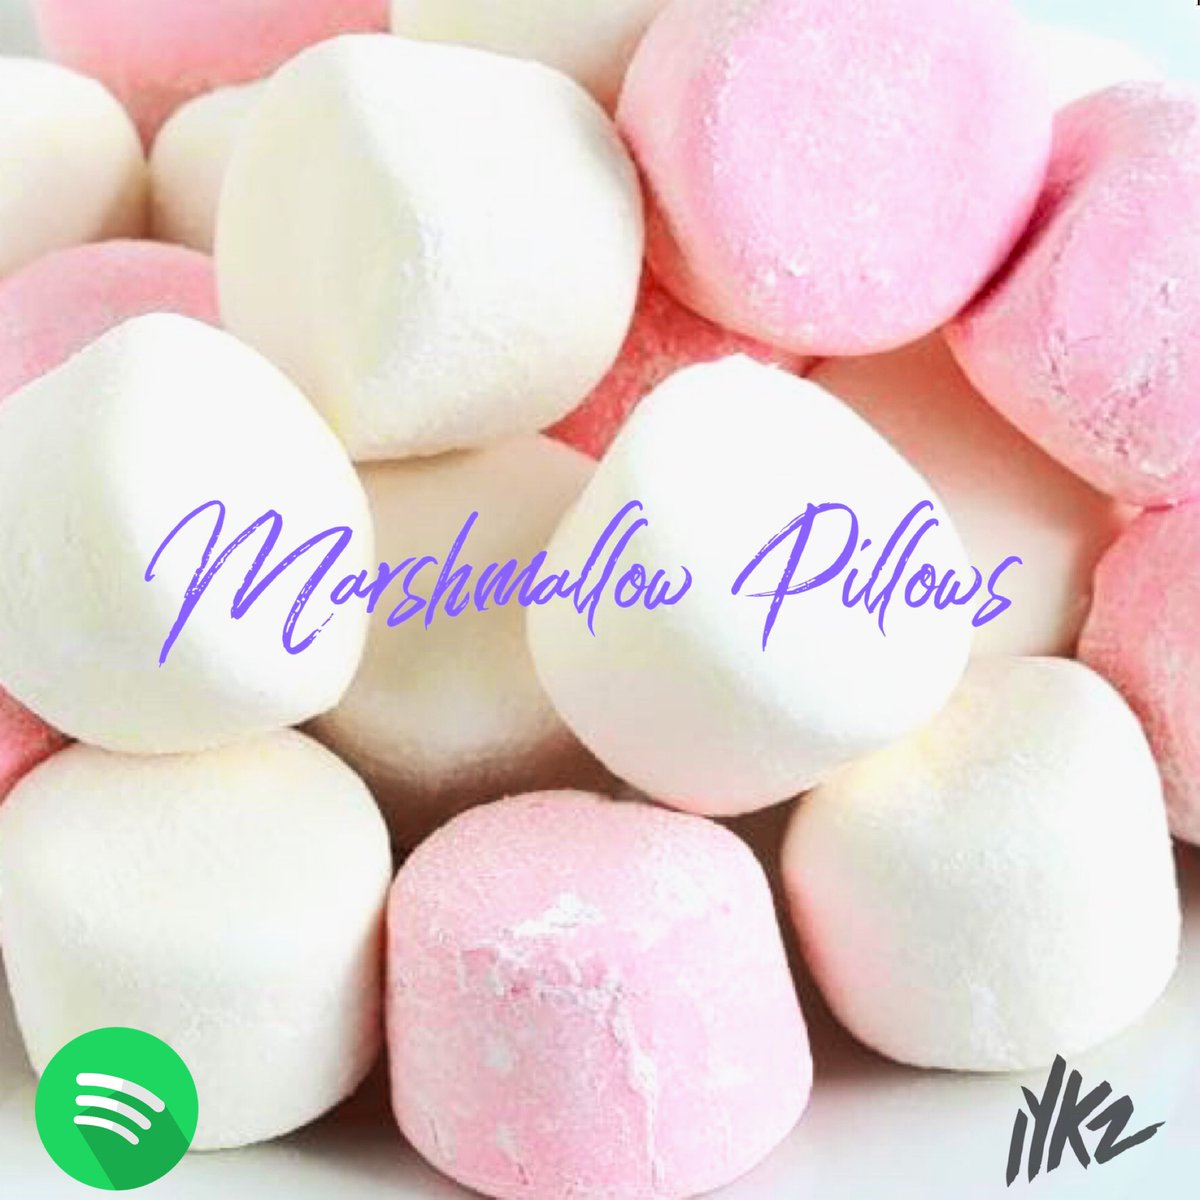 New r&b playlist. Spotify. Curated by ME. For the ppl. Yeah... Marshmallow Pillows. 💙💙💙

open.spotify.com/user/ikesmusic…